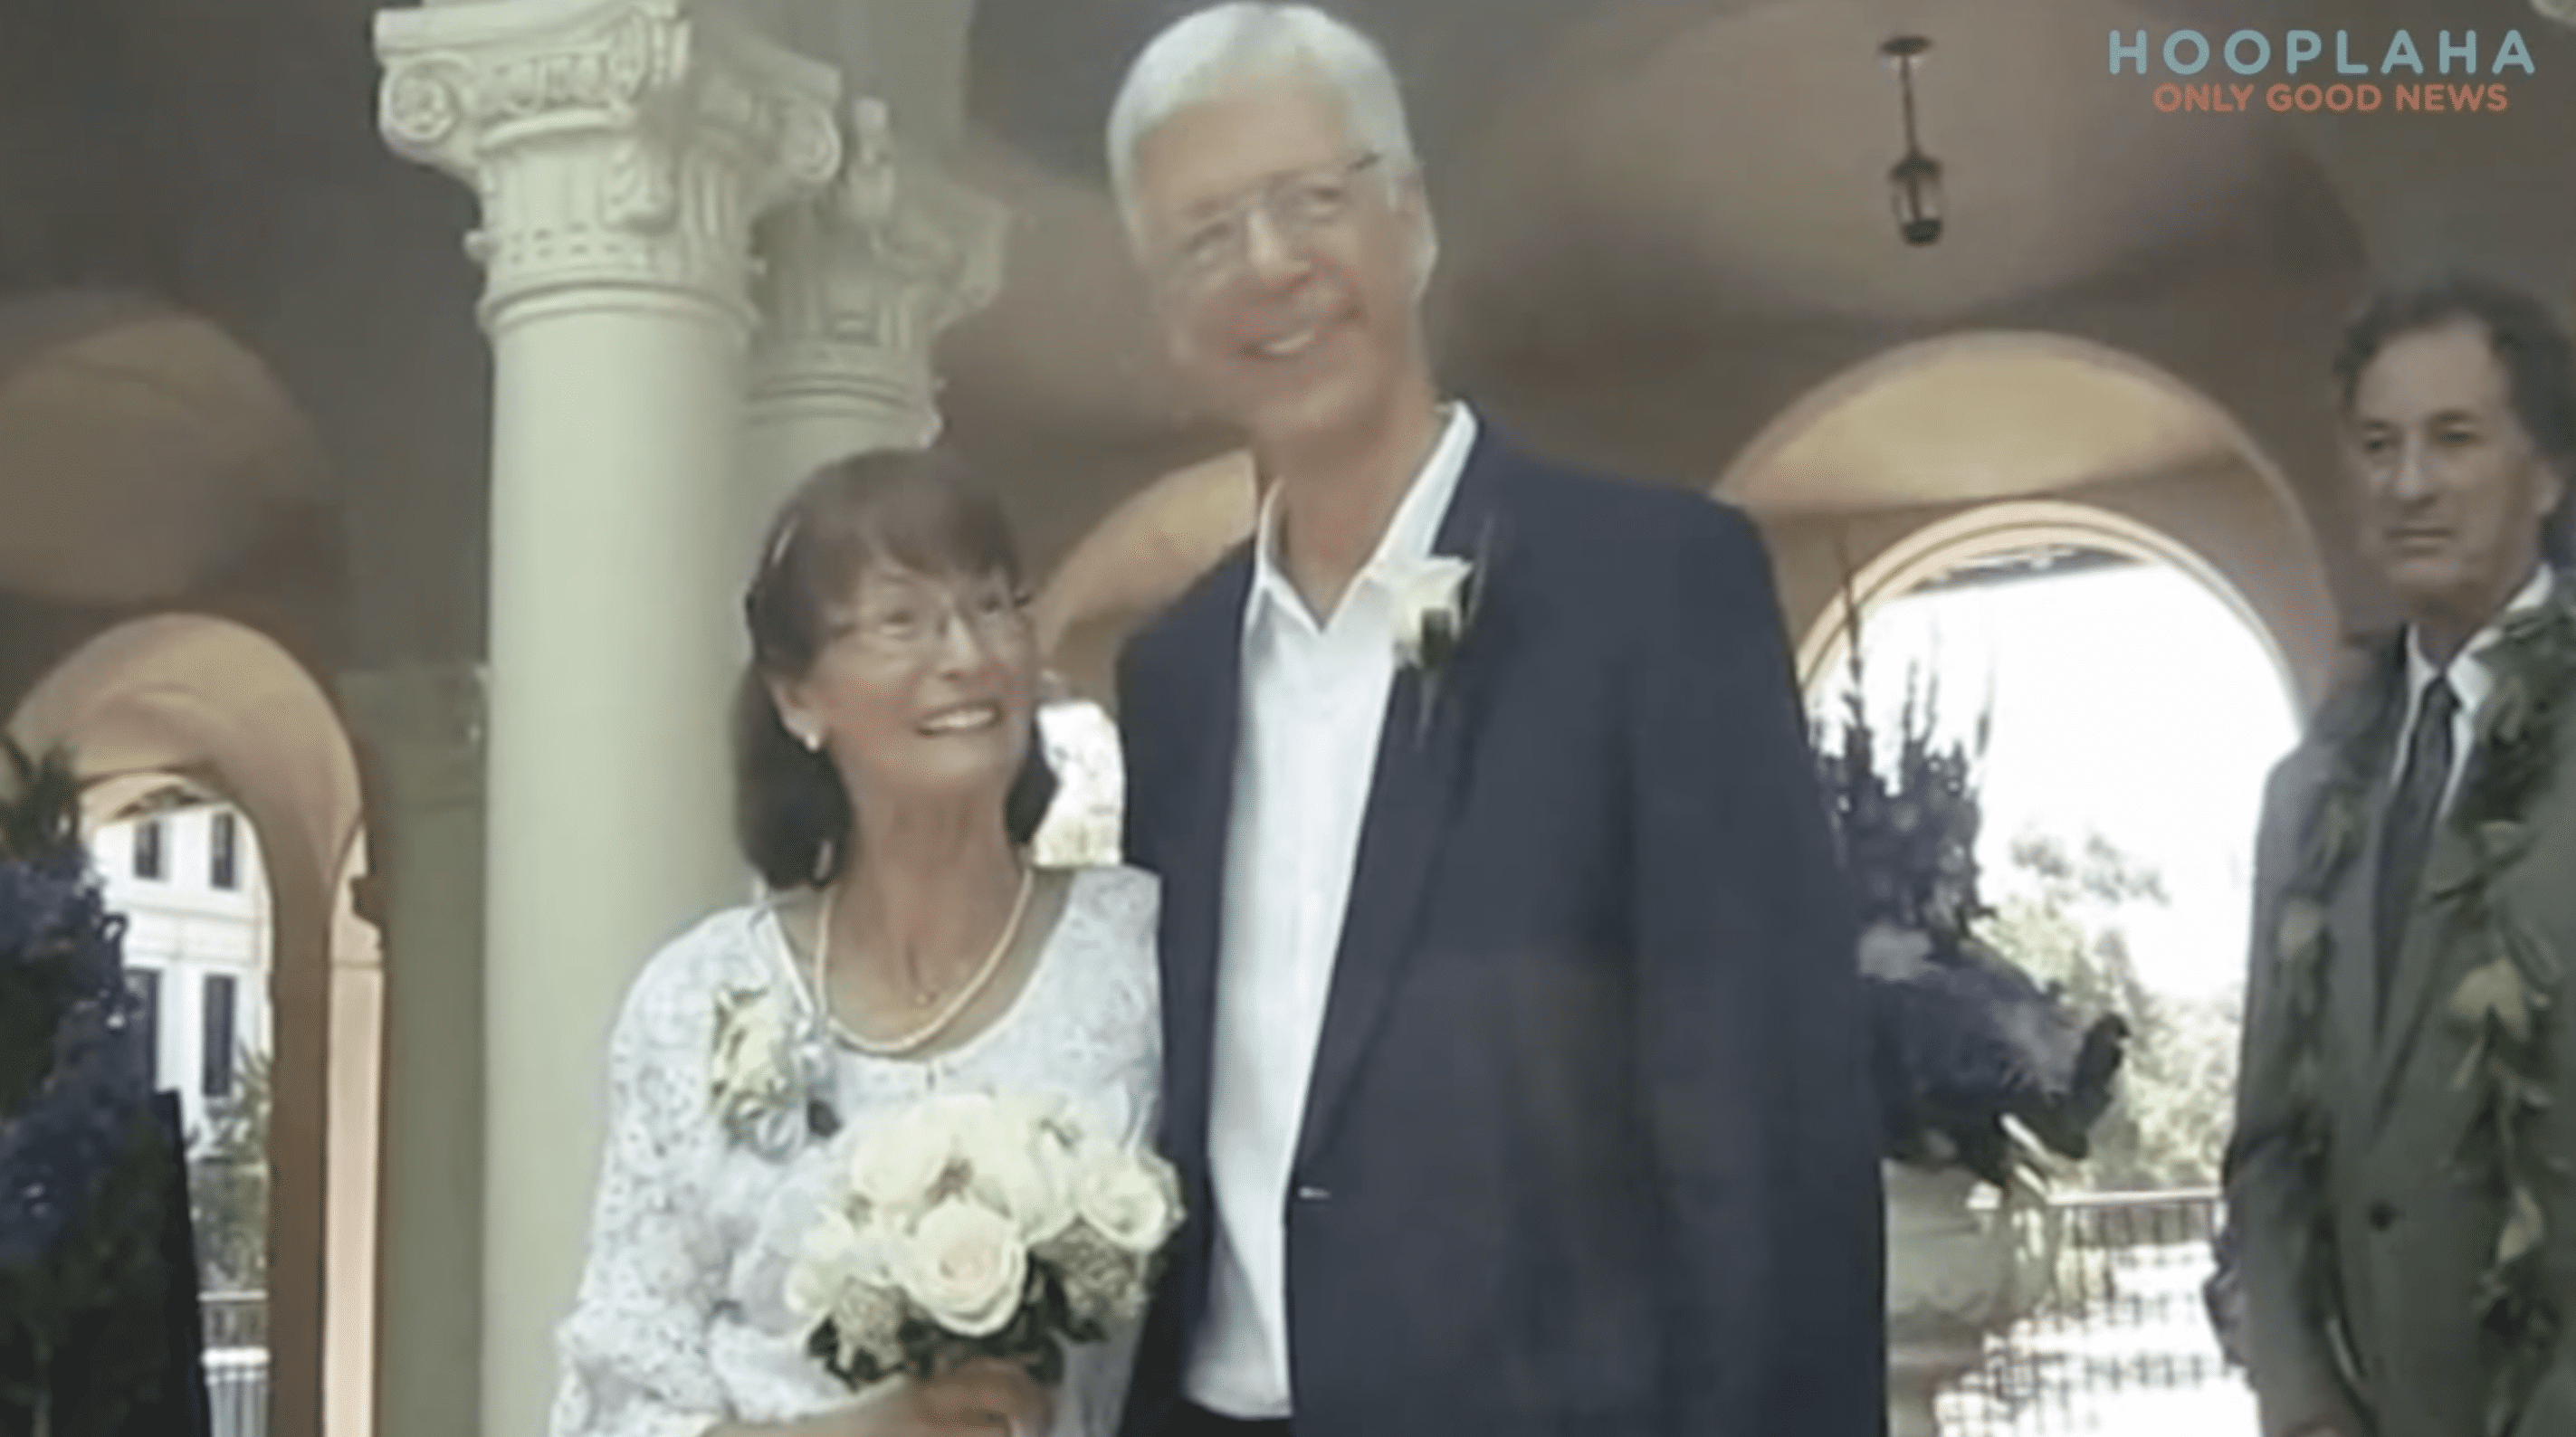 Willson and Rude got married in the cafeteria of Occidental College in 2012. | Photo: YouTube.com/OnlyGood TV